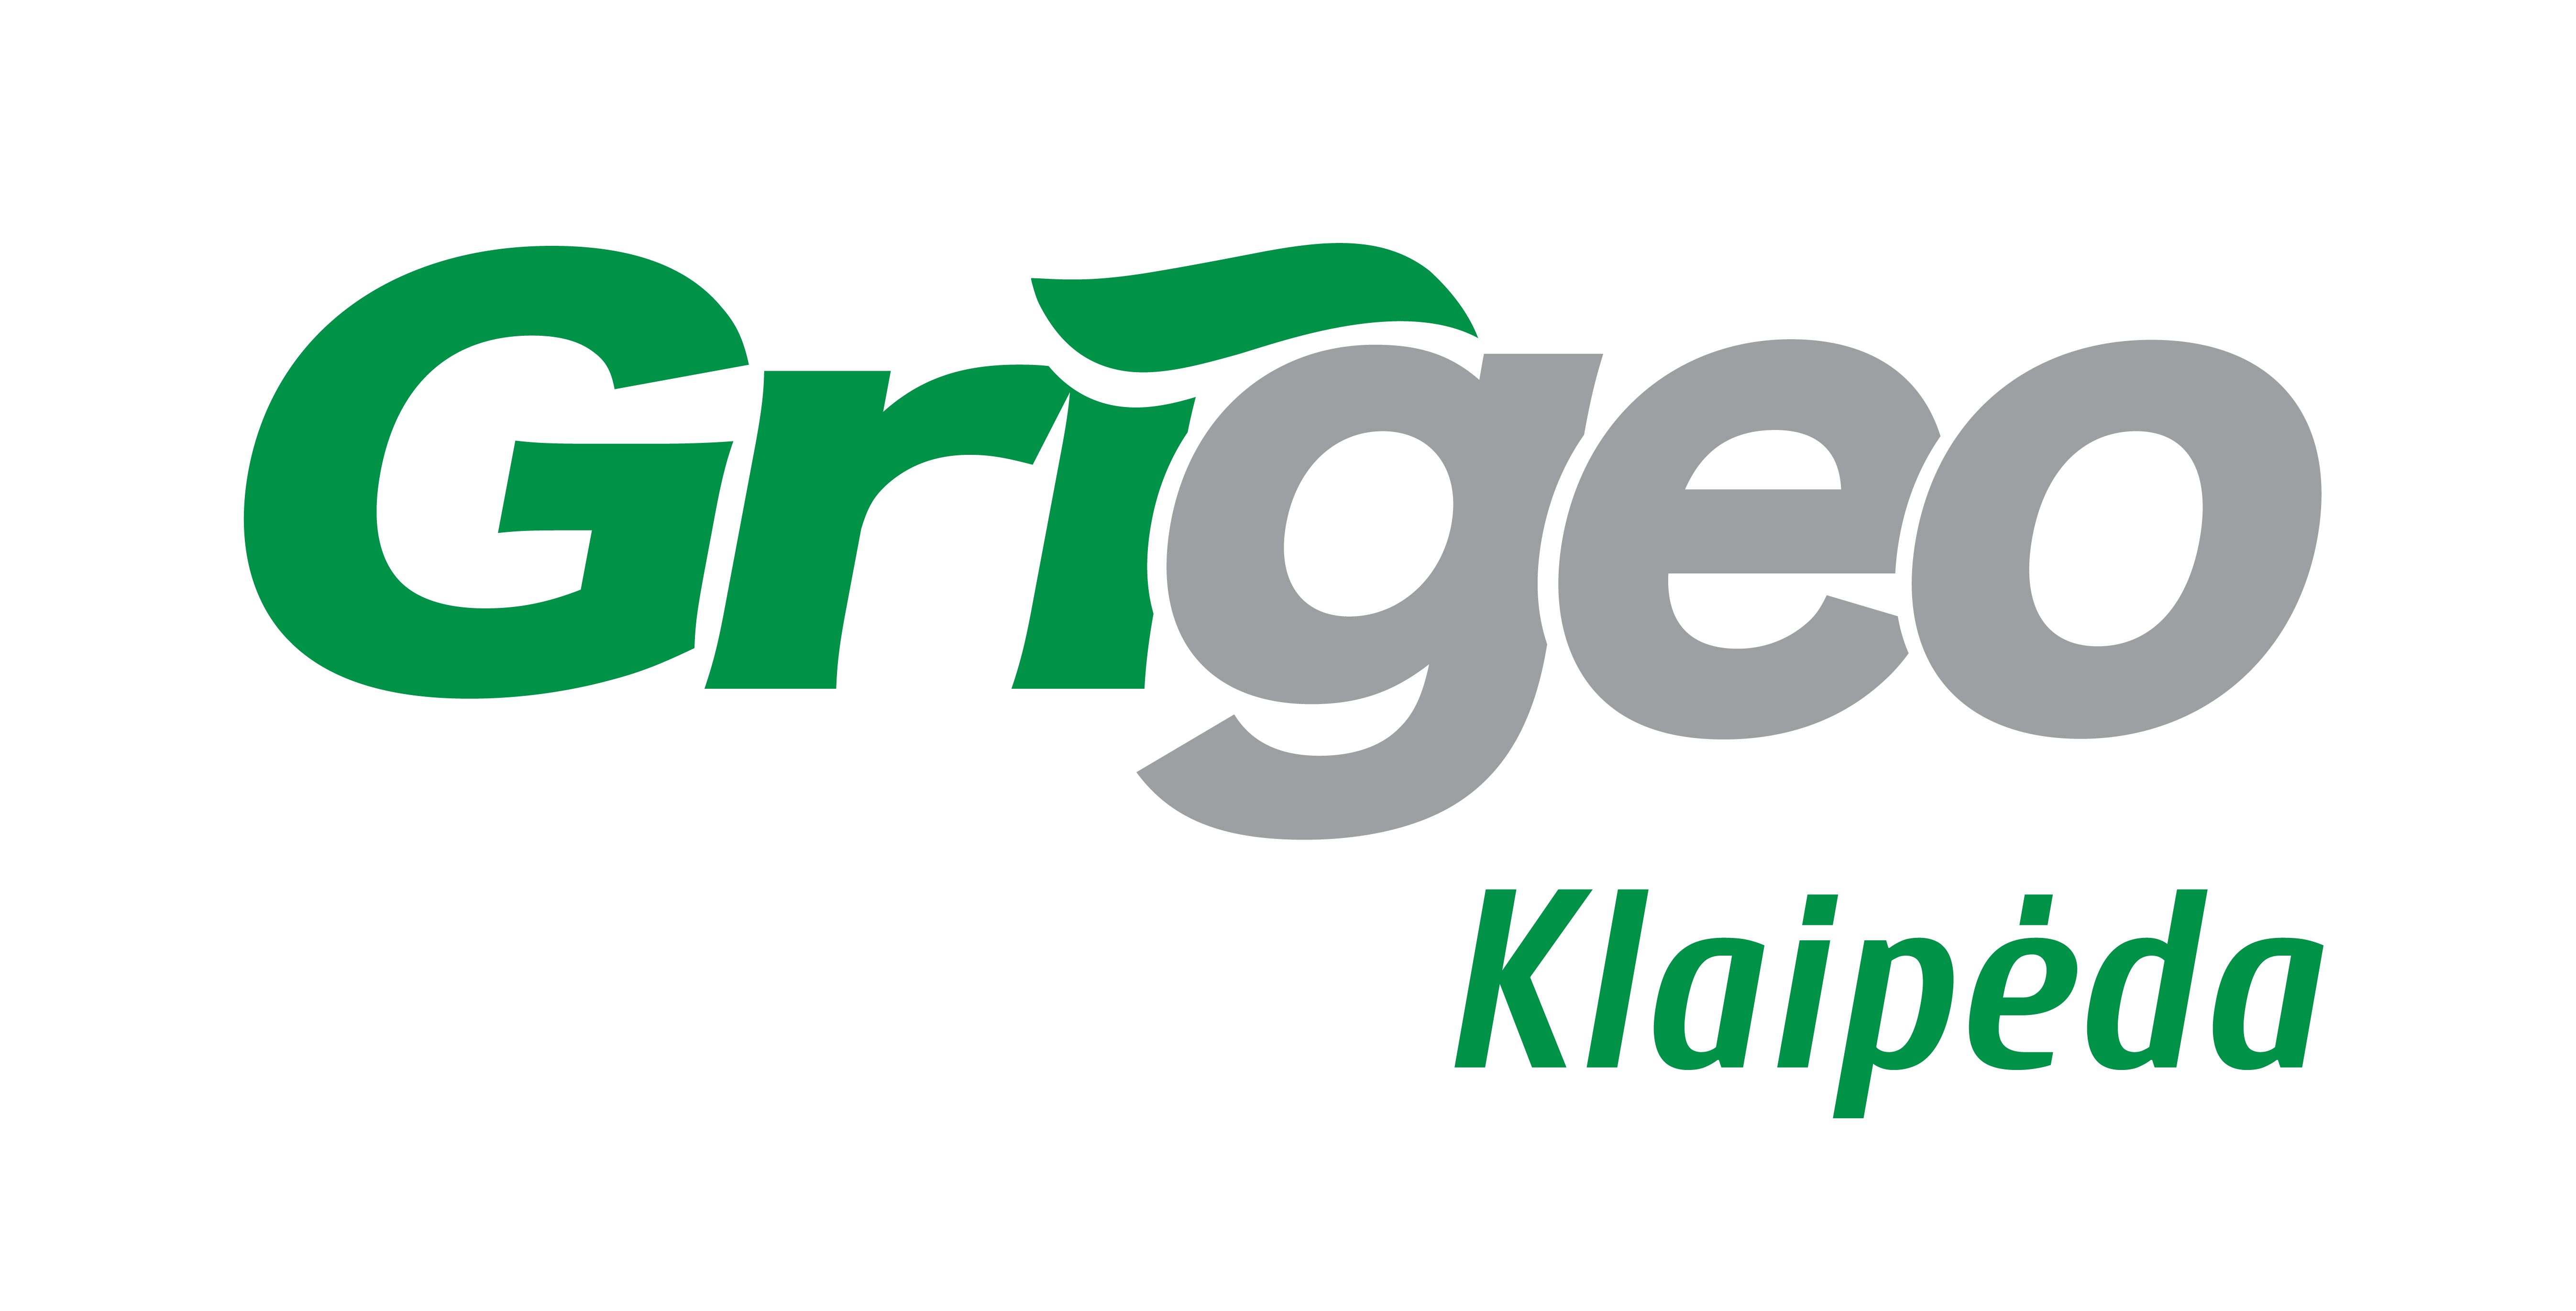 AB Grigeo Klaipėda contacted the responsible institutions with a request to commence expert discussions on the assessment of environmental damage